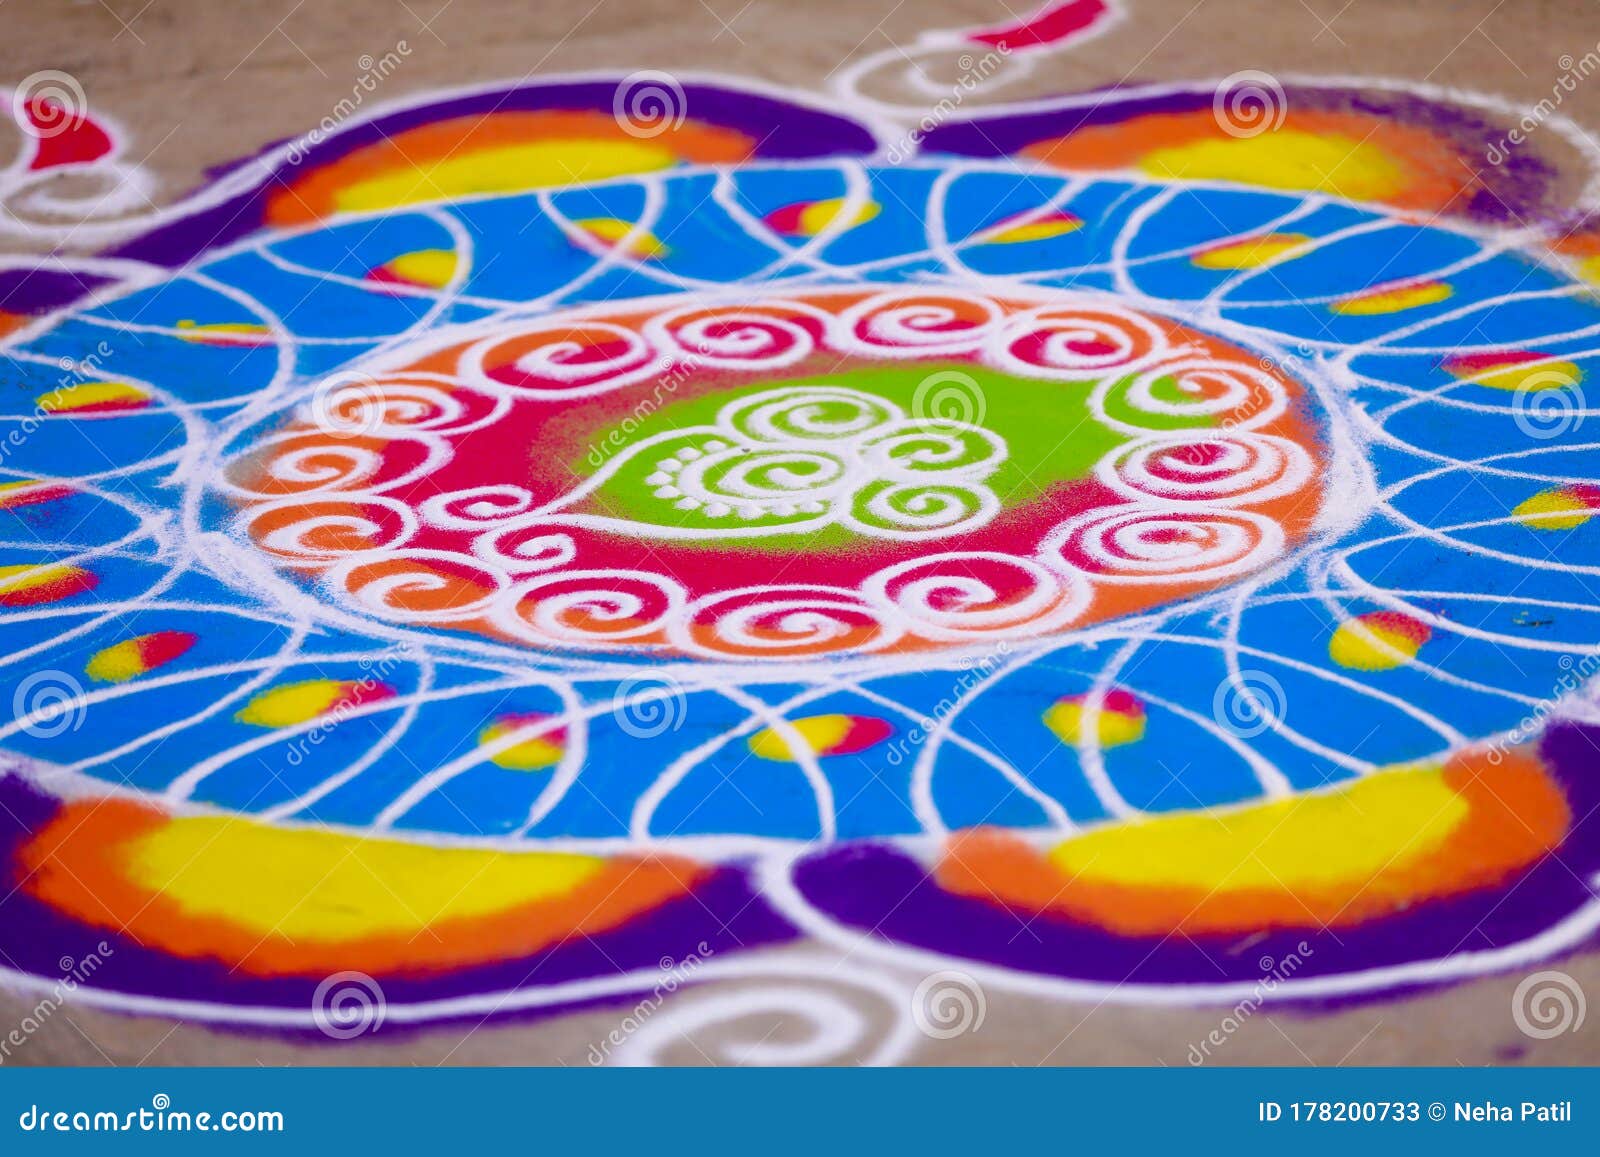 Traditional Indian Wedding Ceremony in Hinduism : Rangoli Design for  Welcome Stock Image - Image of bride, girl: 178189921